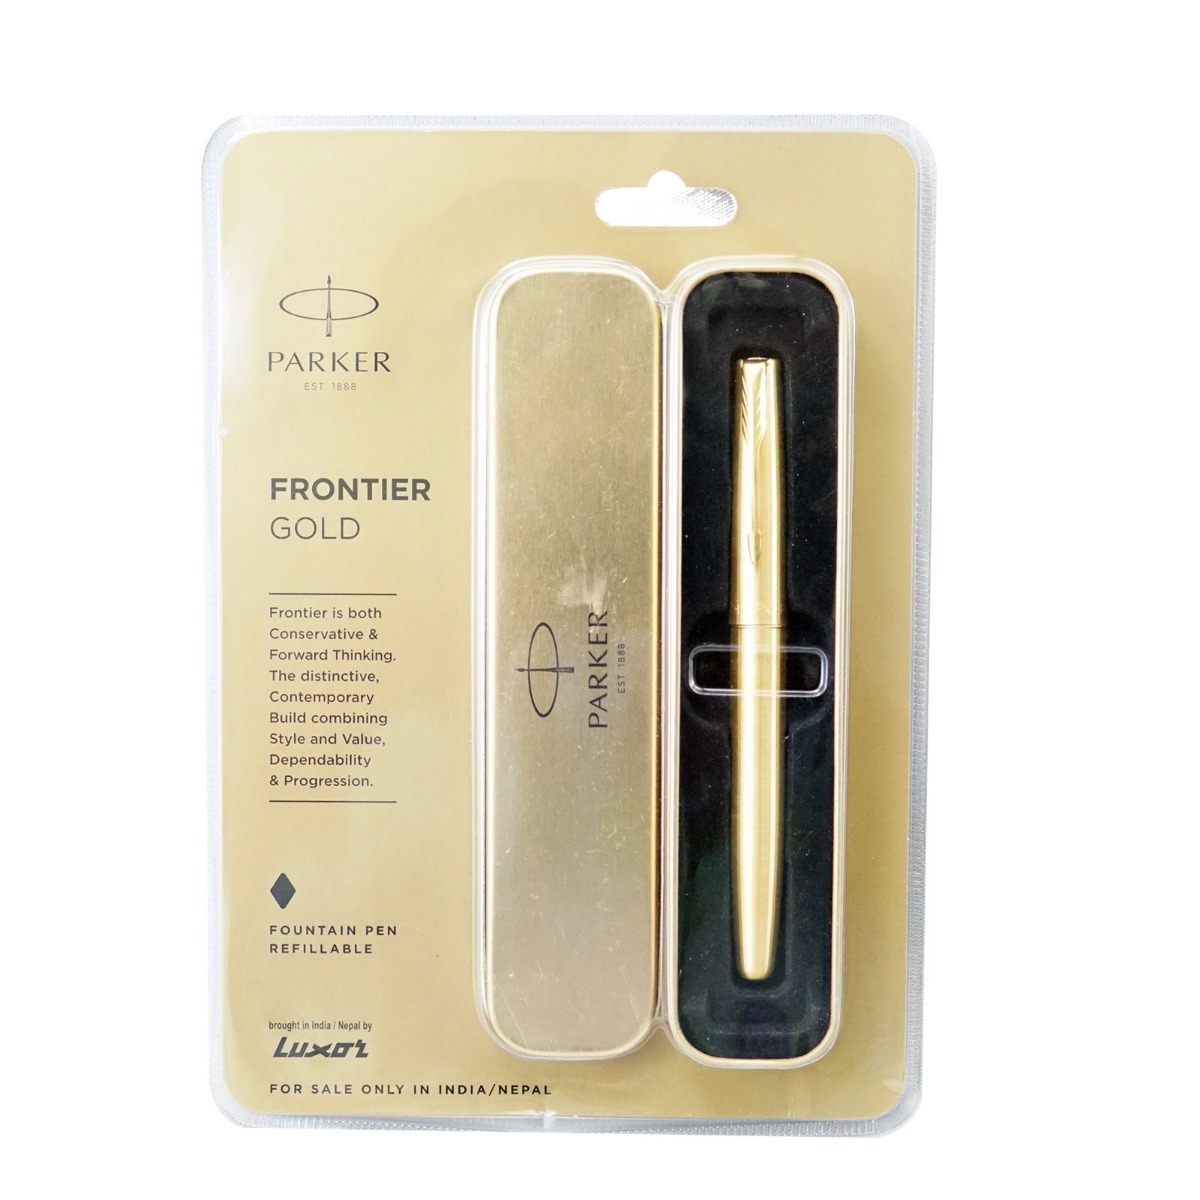 Parker Frontier Gold Model:17416 Full Gold Color Body Fountain Pen